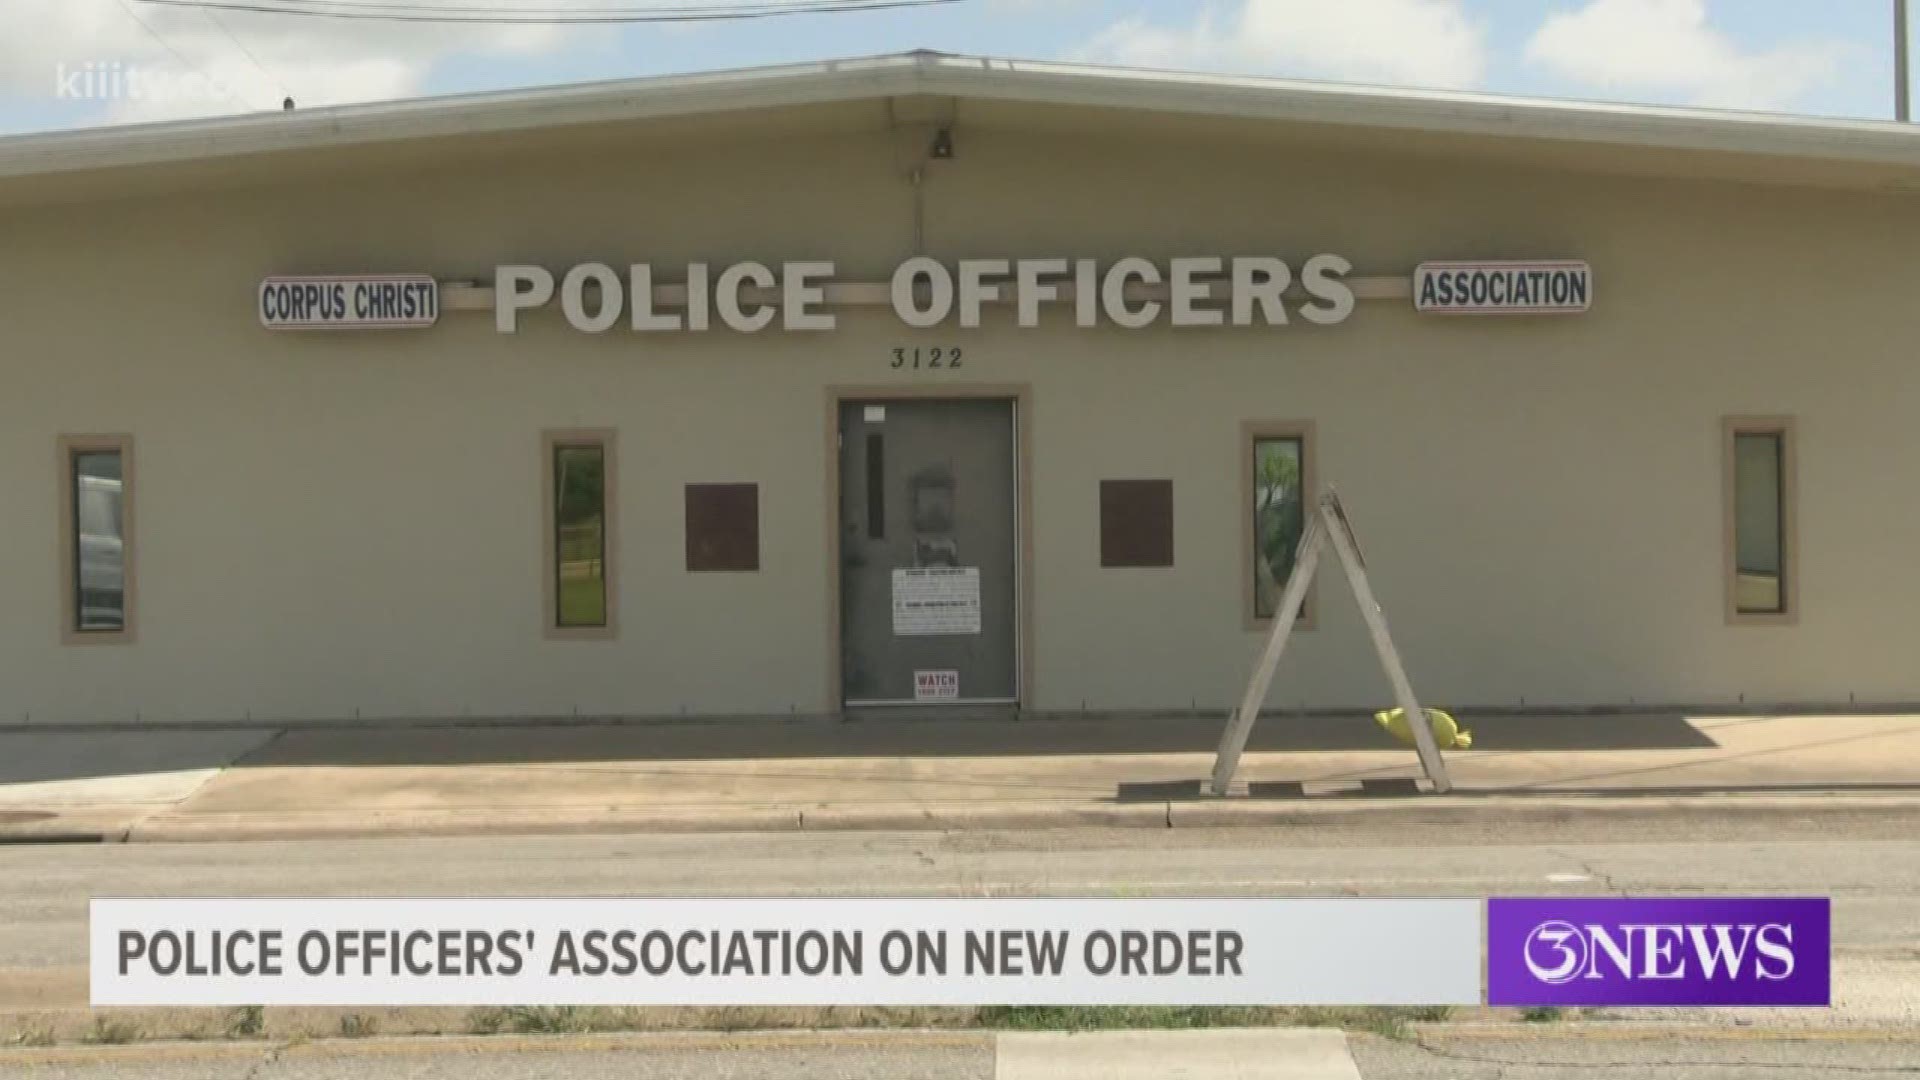 We spoke with the head of the Corpus Christi Police Officers Association who said there is always room for improvement.